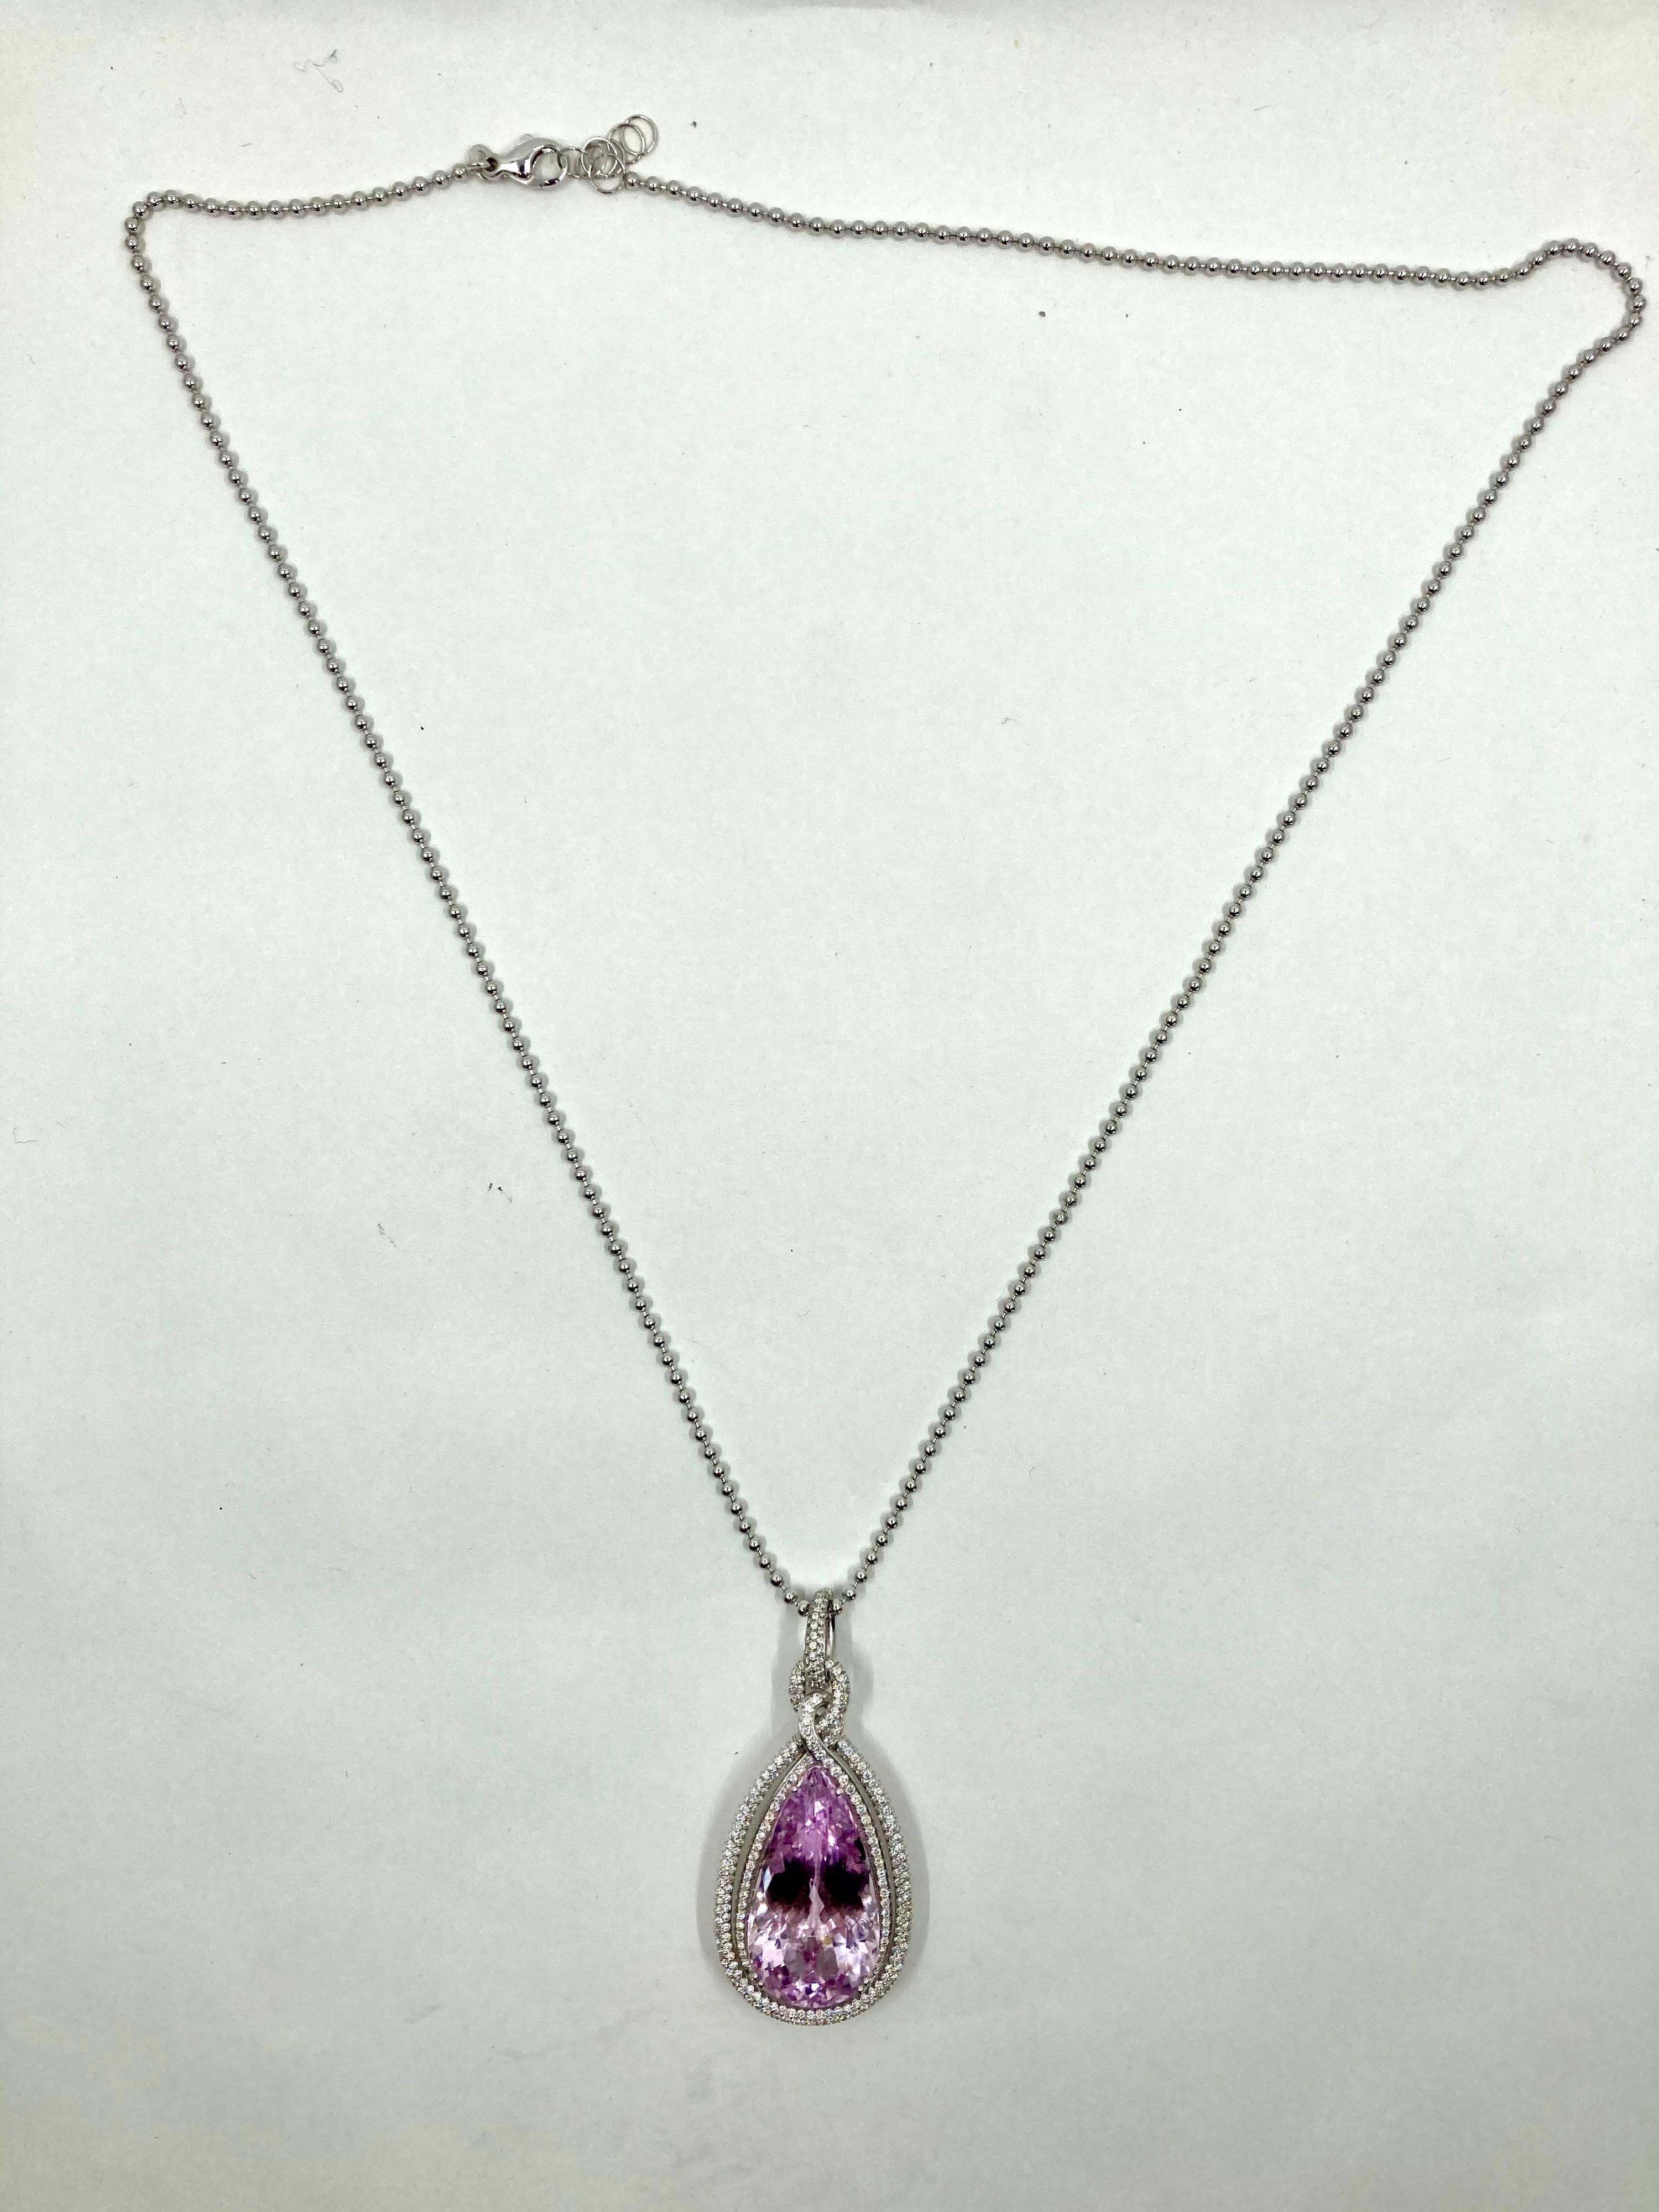 Timeless White Gold Necklace, with Kunzite ct. 46,50 and Diamonds ct. 1.93, Made in Italy by Roberto Casarin

a pear-shaped Kunzite is the main protagonist of this timeless pendant necklace. With its 46,50 Carat, settled in a white gold frame with